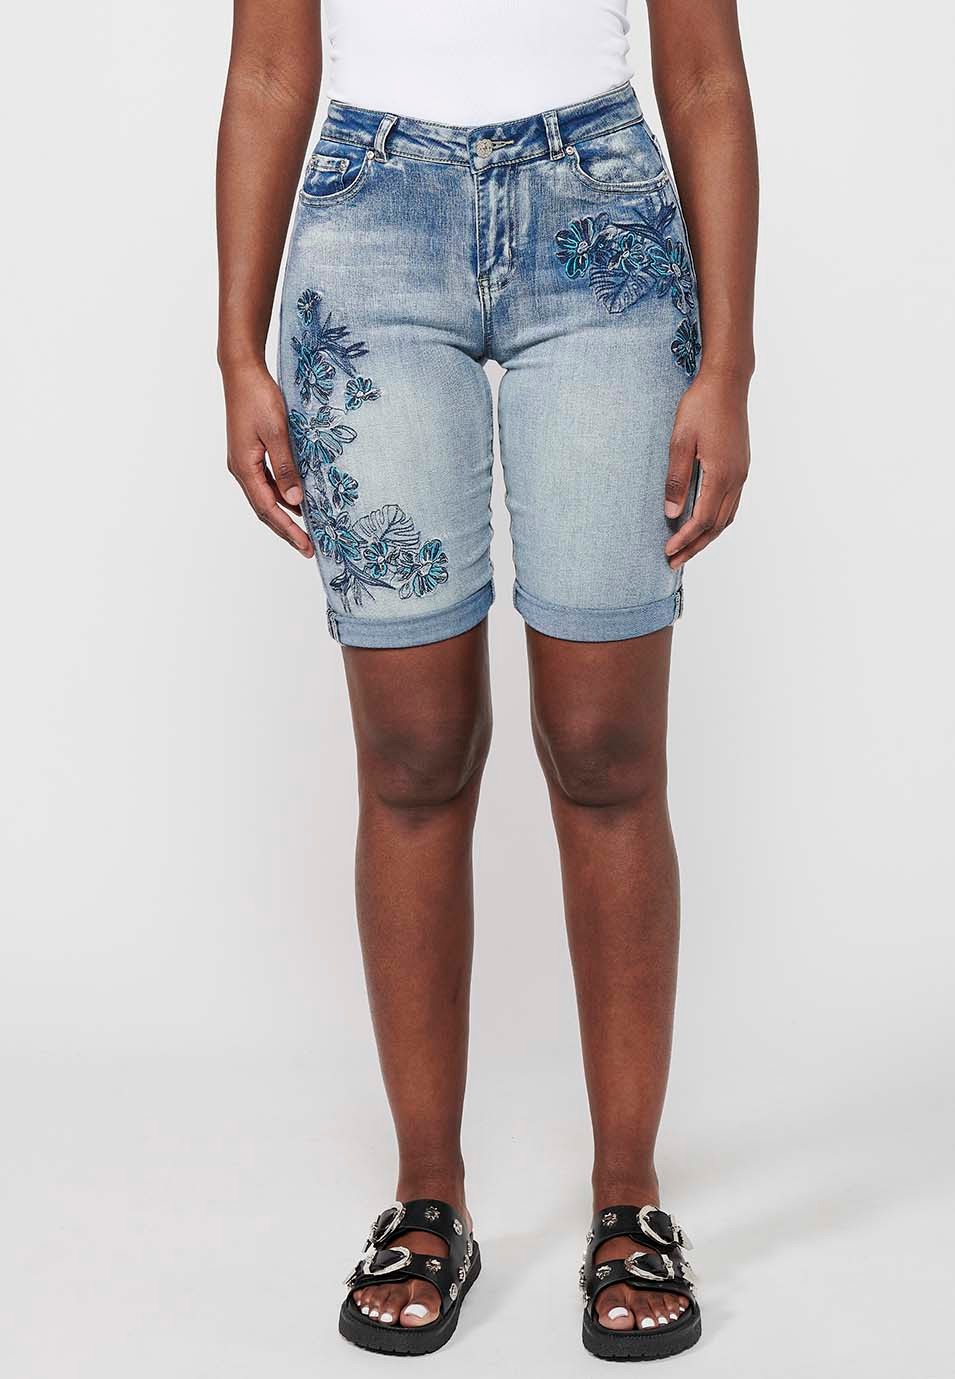 Women's Light Blue Floral Embroidery Shorts